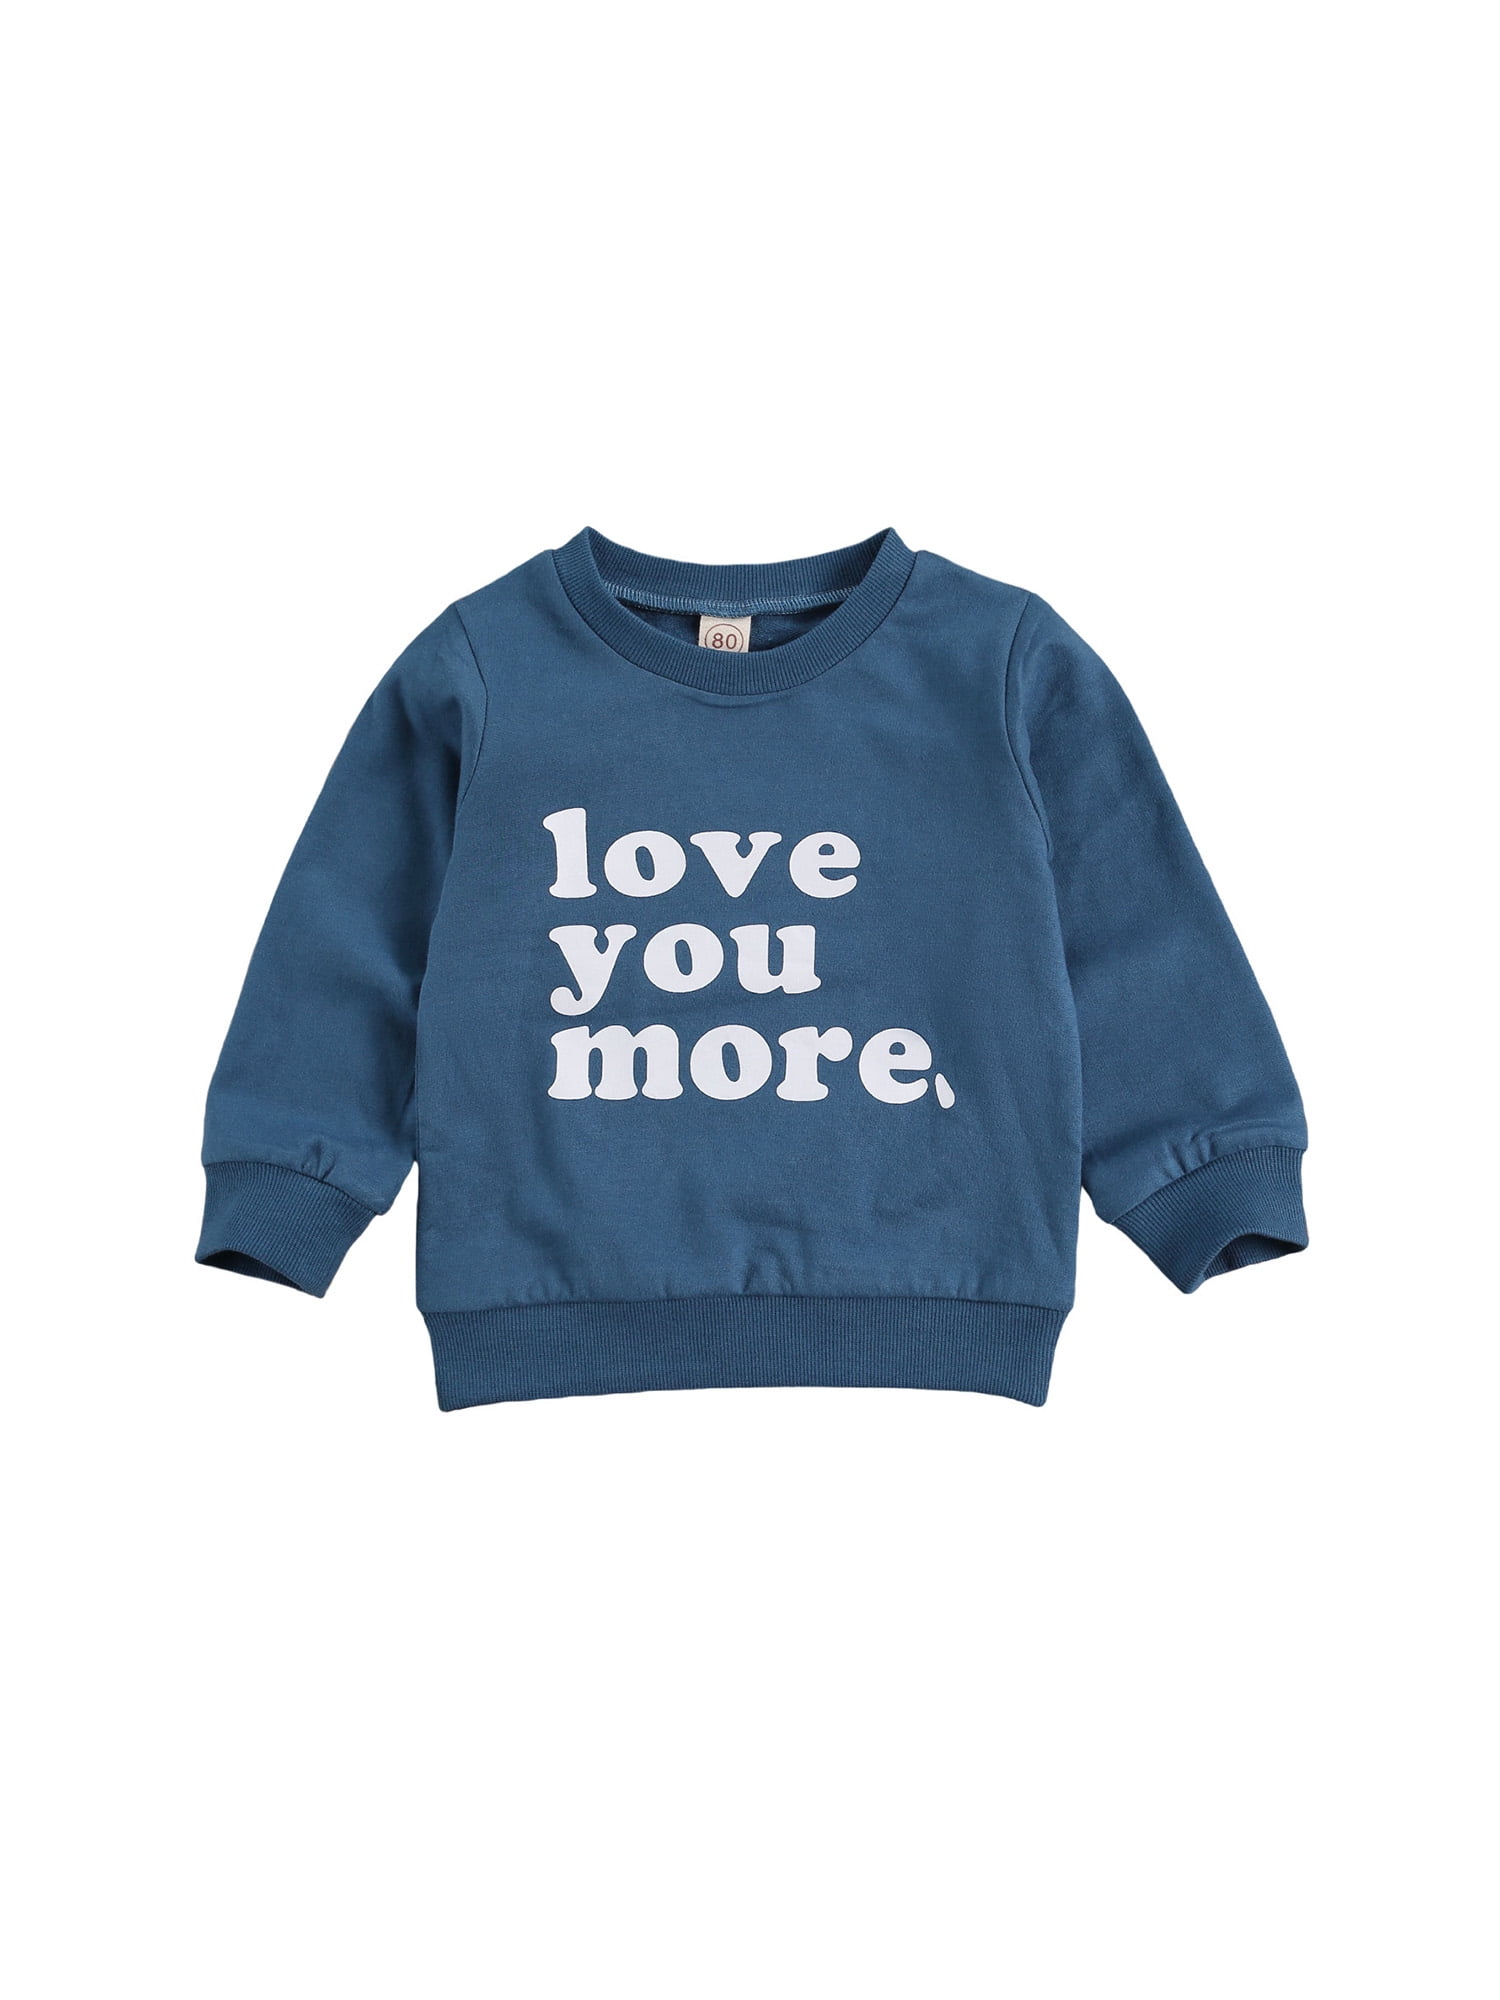 Canis Infant Baby Boy Girl Valentine's Day Clothes Sweatshirt T-Shirt ...